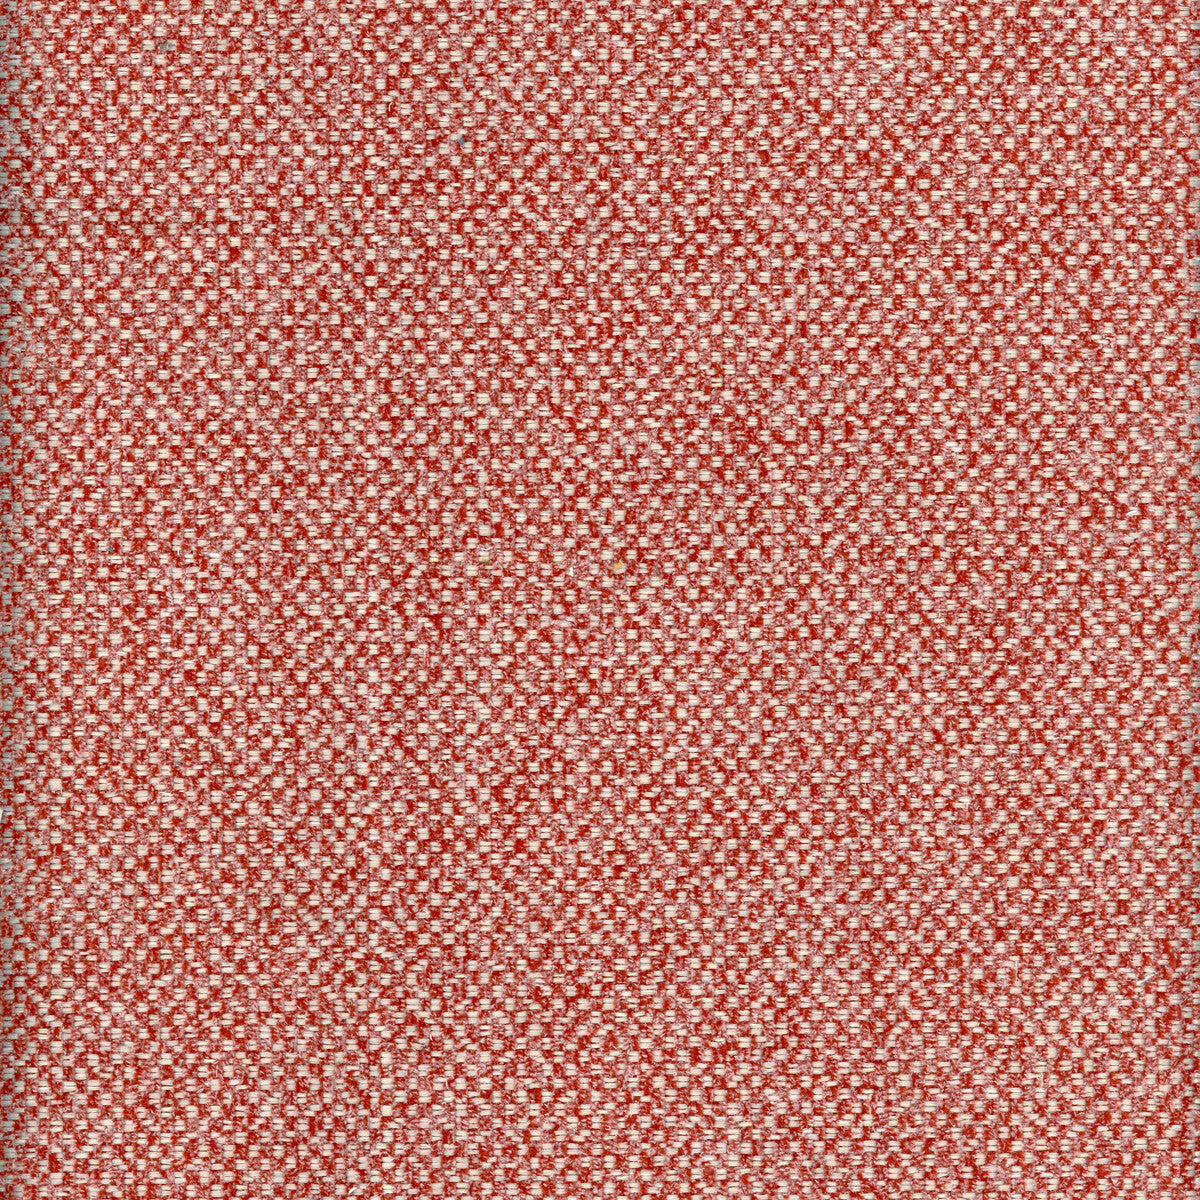 Yosemite fabric in fall color - pattern AM100332.9.0 - by Kravet Couture in the Andrew Martin Canyon collection